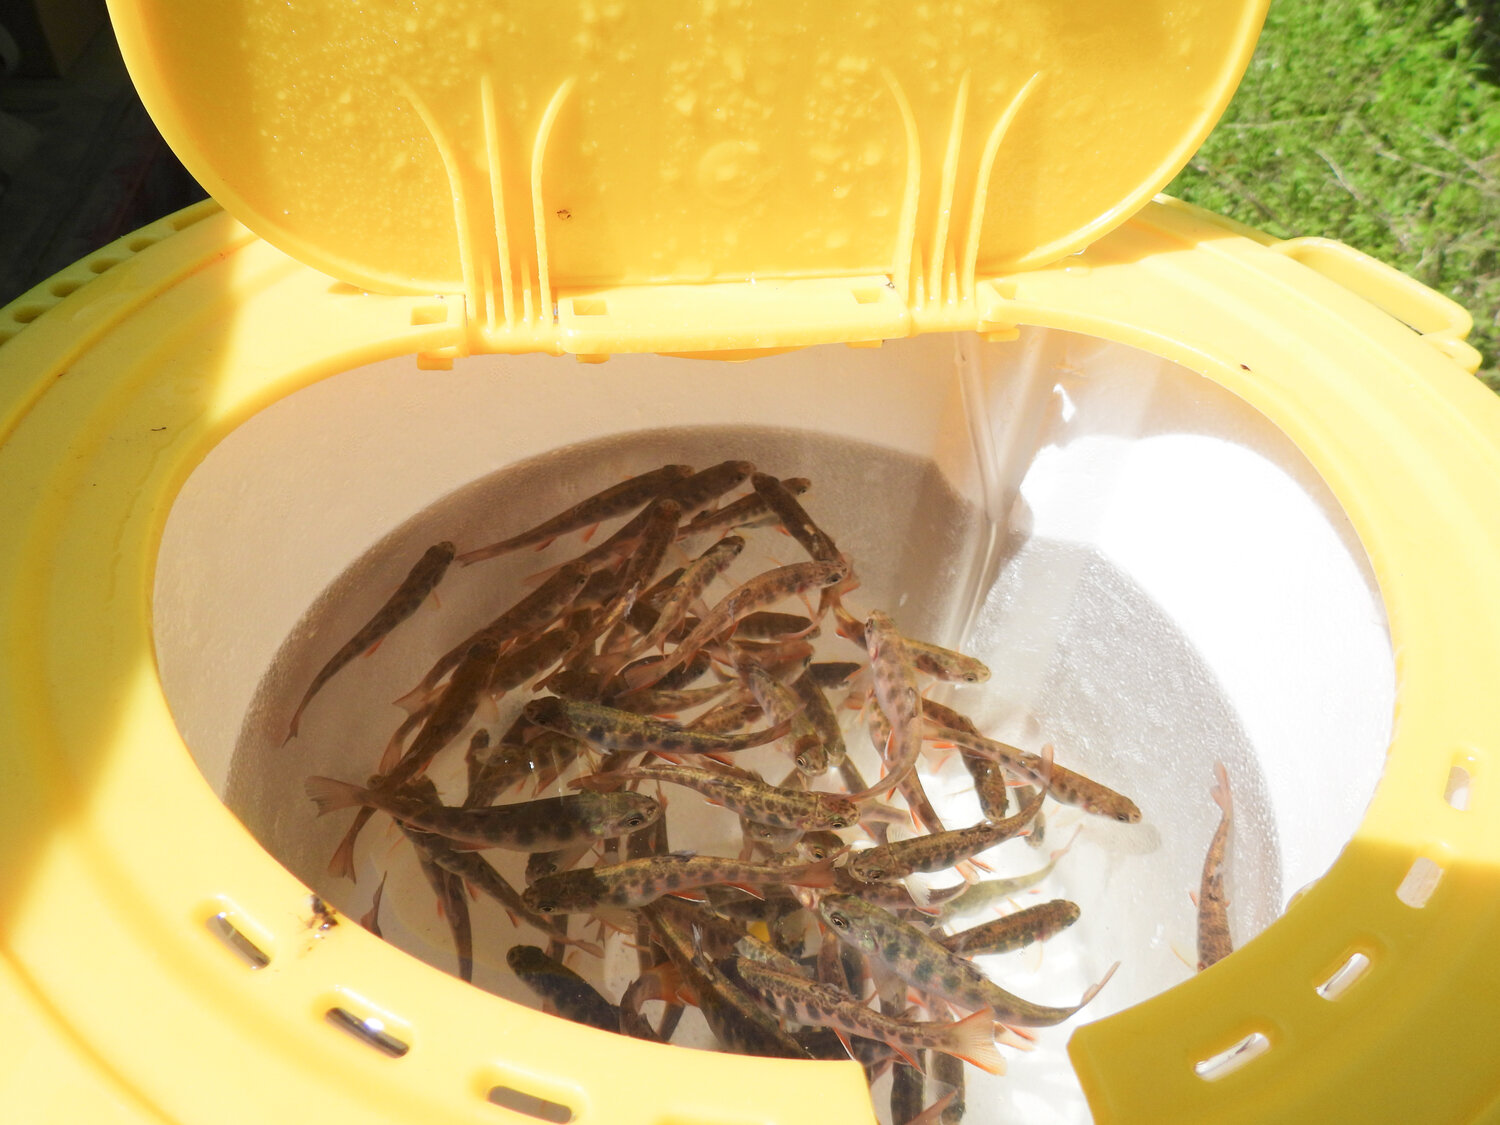 Brook trout raised by Holy Cross Academy await release into Sconondoa Creek.